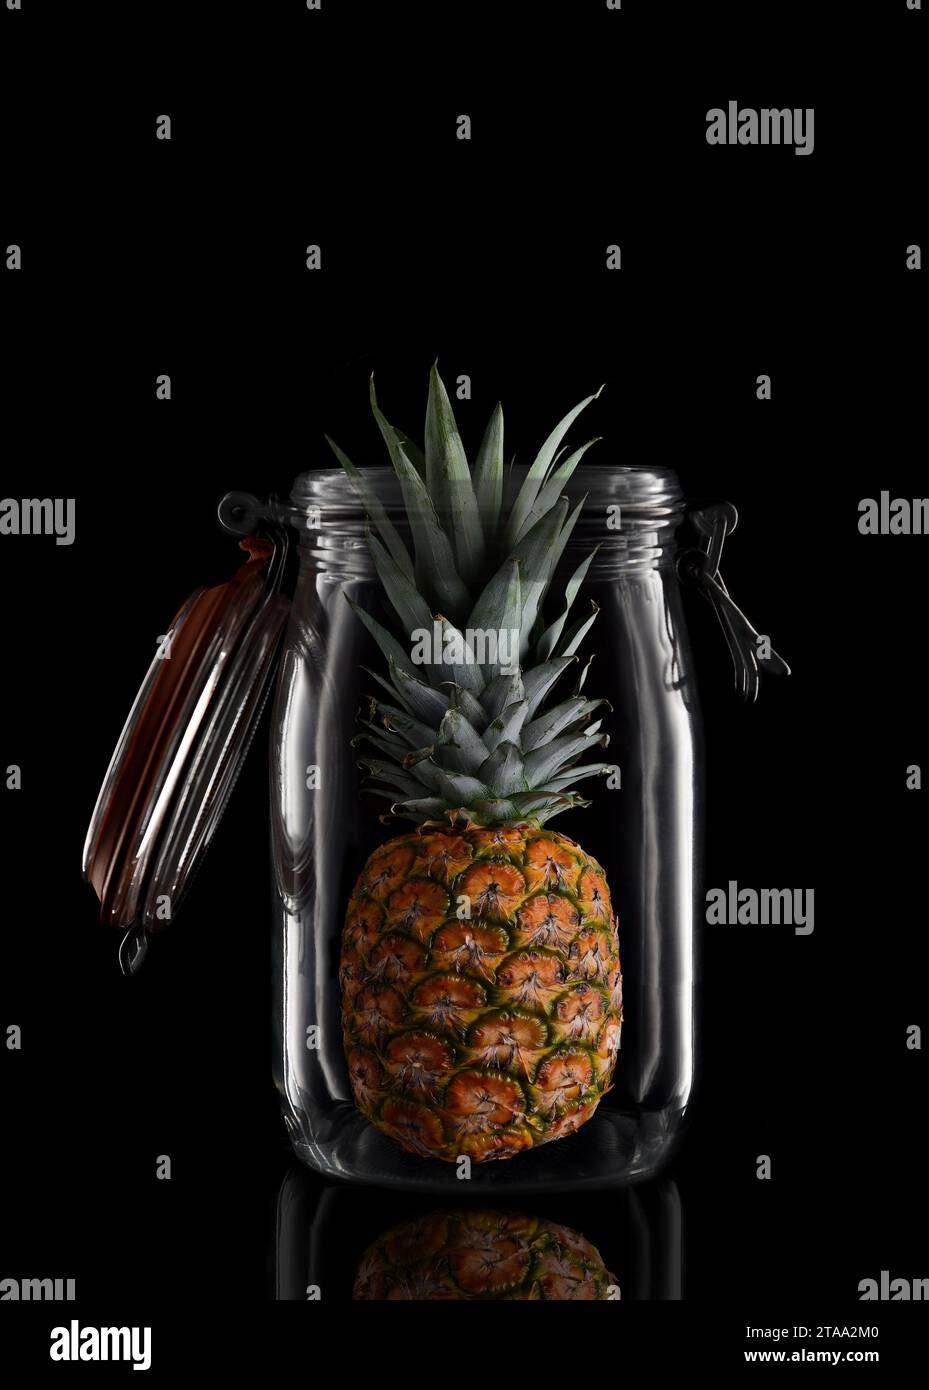 A whole Pineapple in a glass storage or canning jar isolated on black with reflection, with lid open. Stock Photo